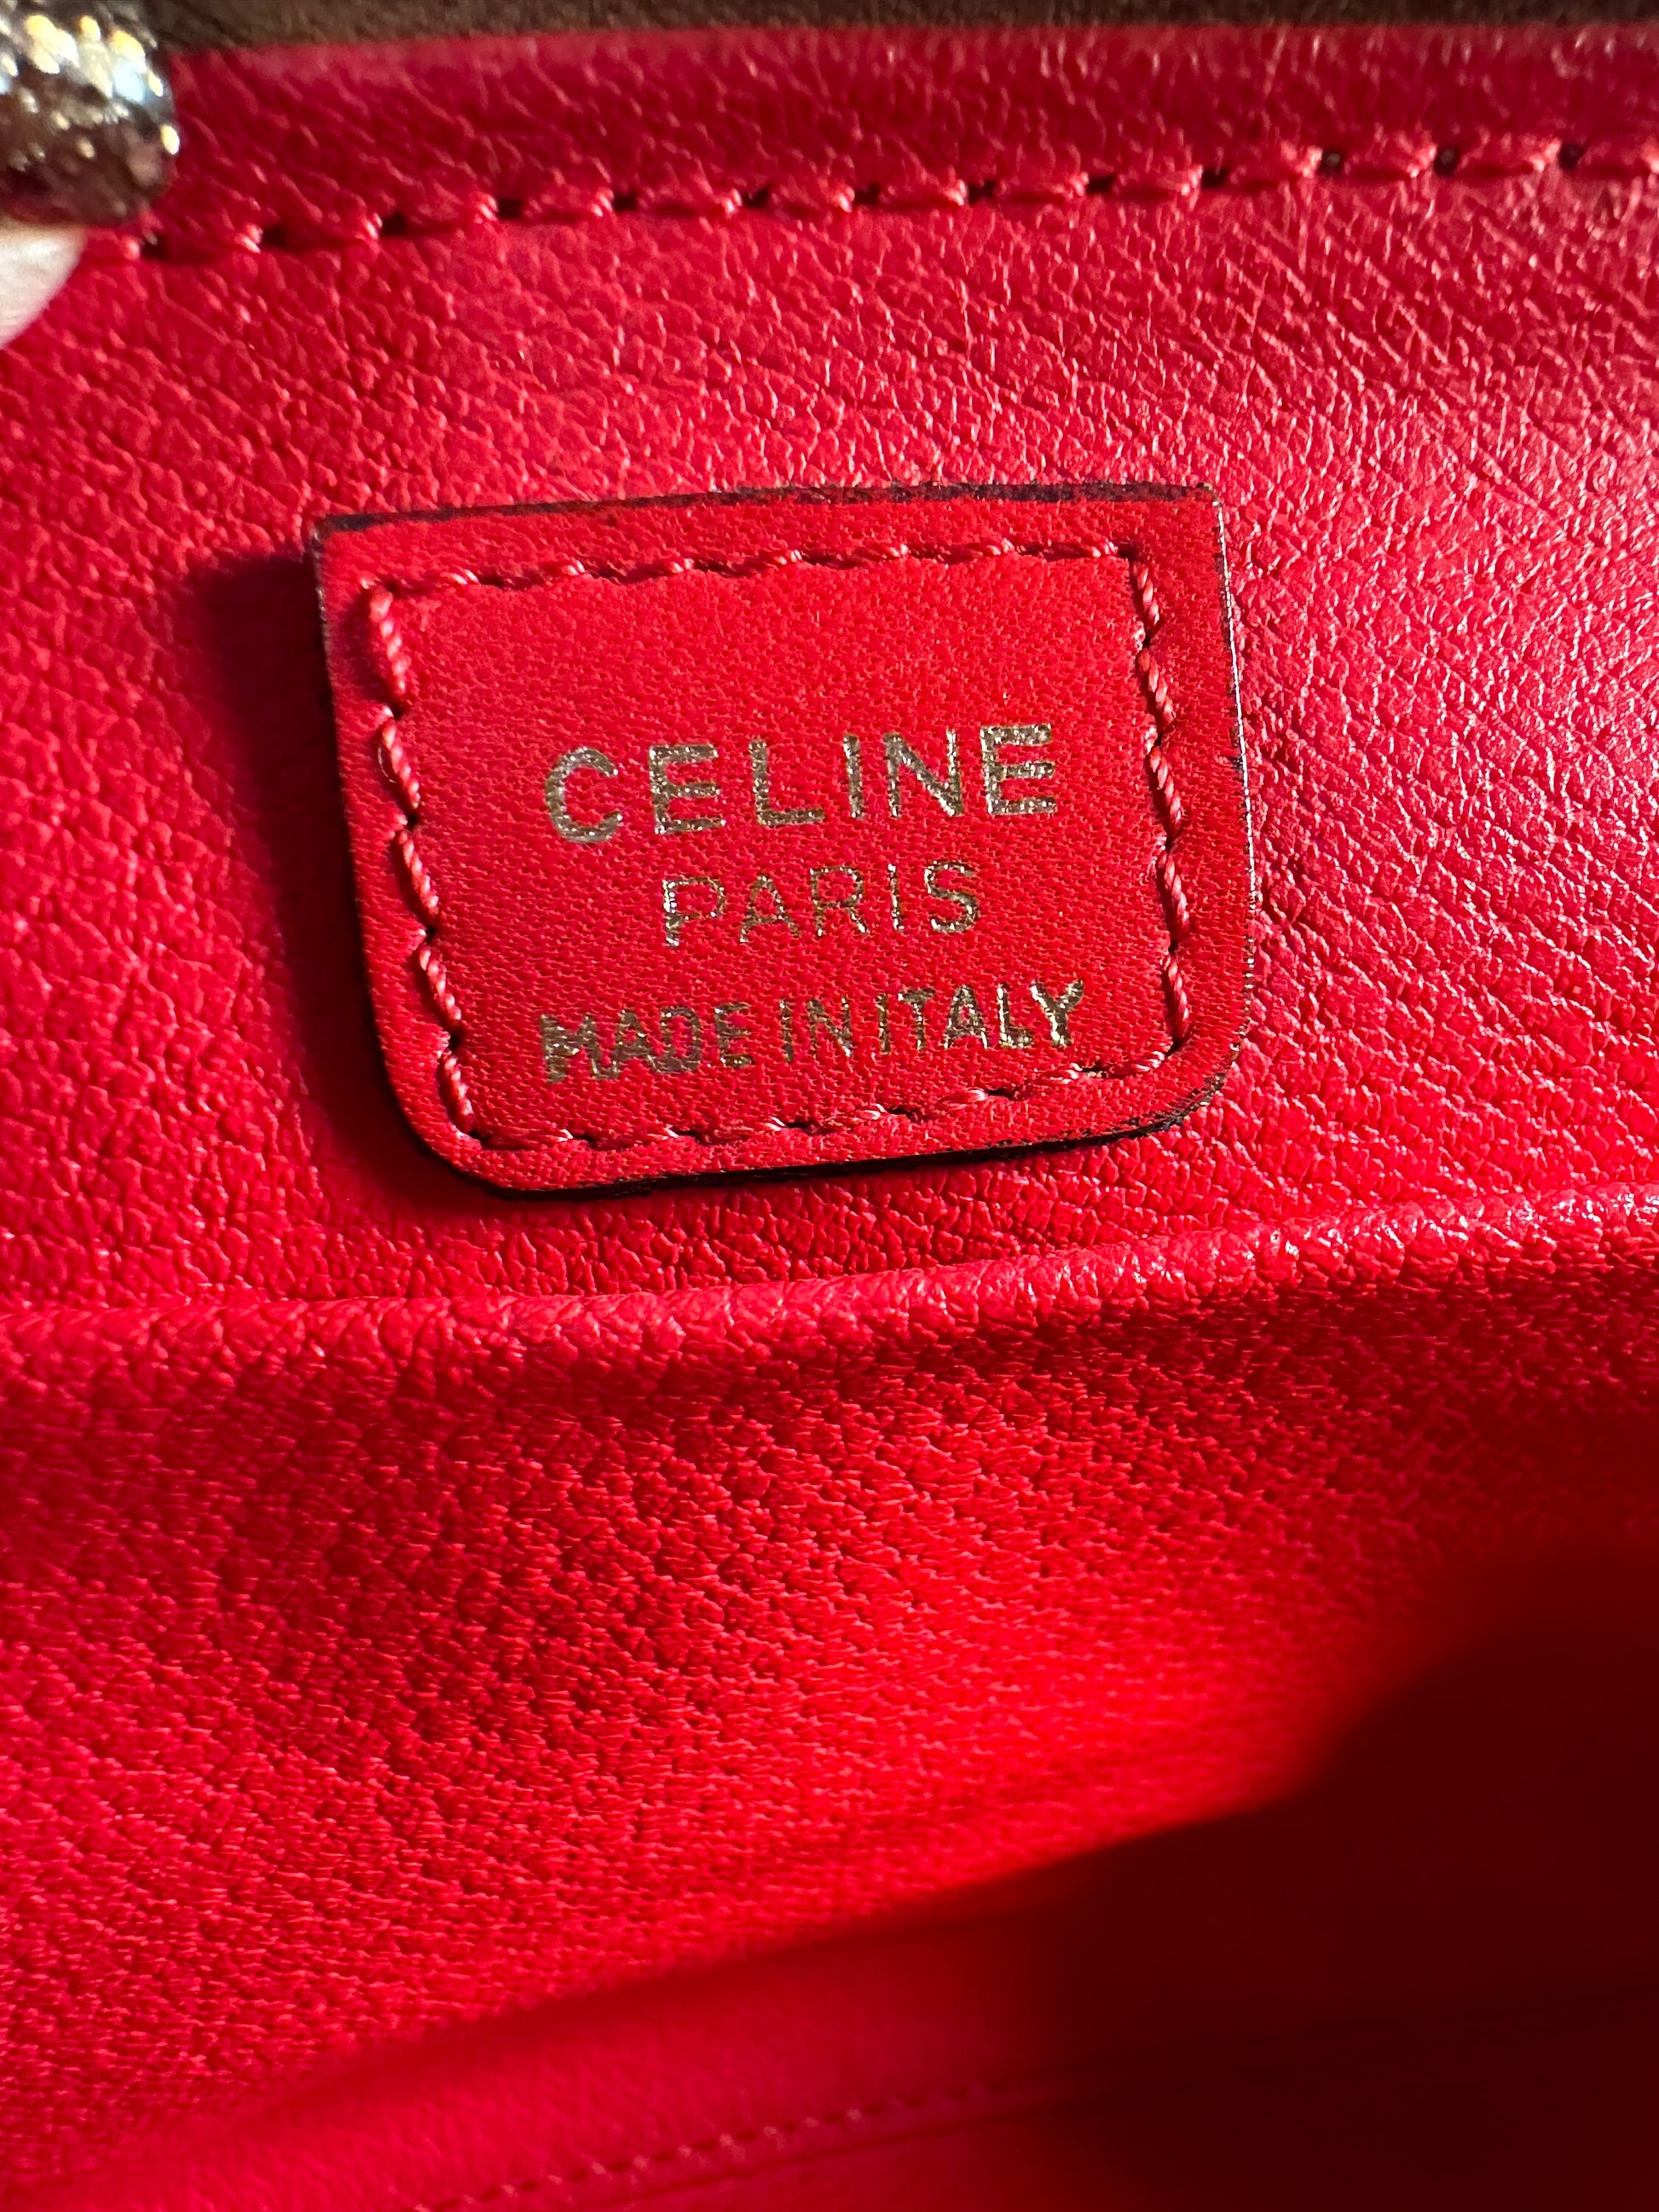 CELINE VINTAGE 100% Authentic Genuine, Doctor Leather Clutch, Medium Brown, 1999's, Great Condition